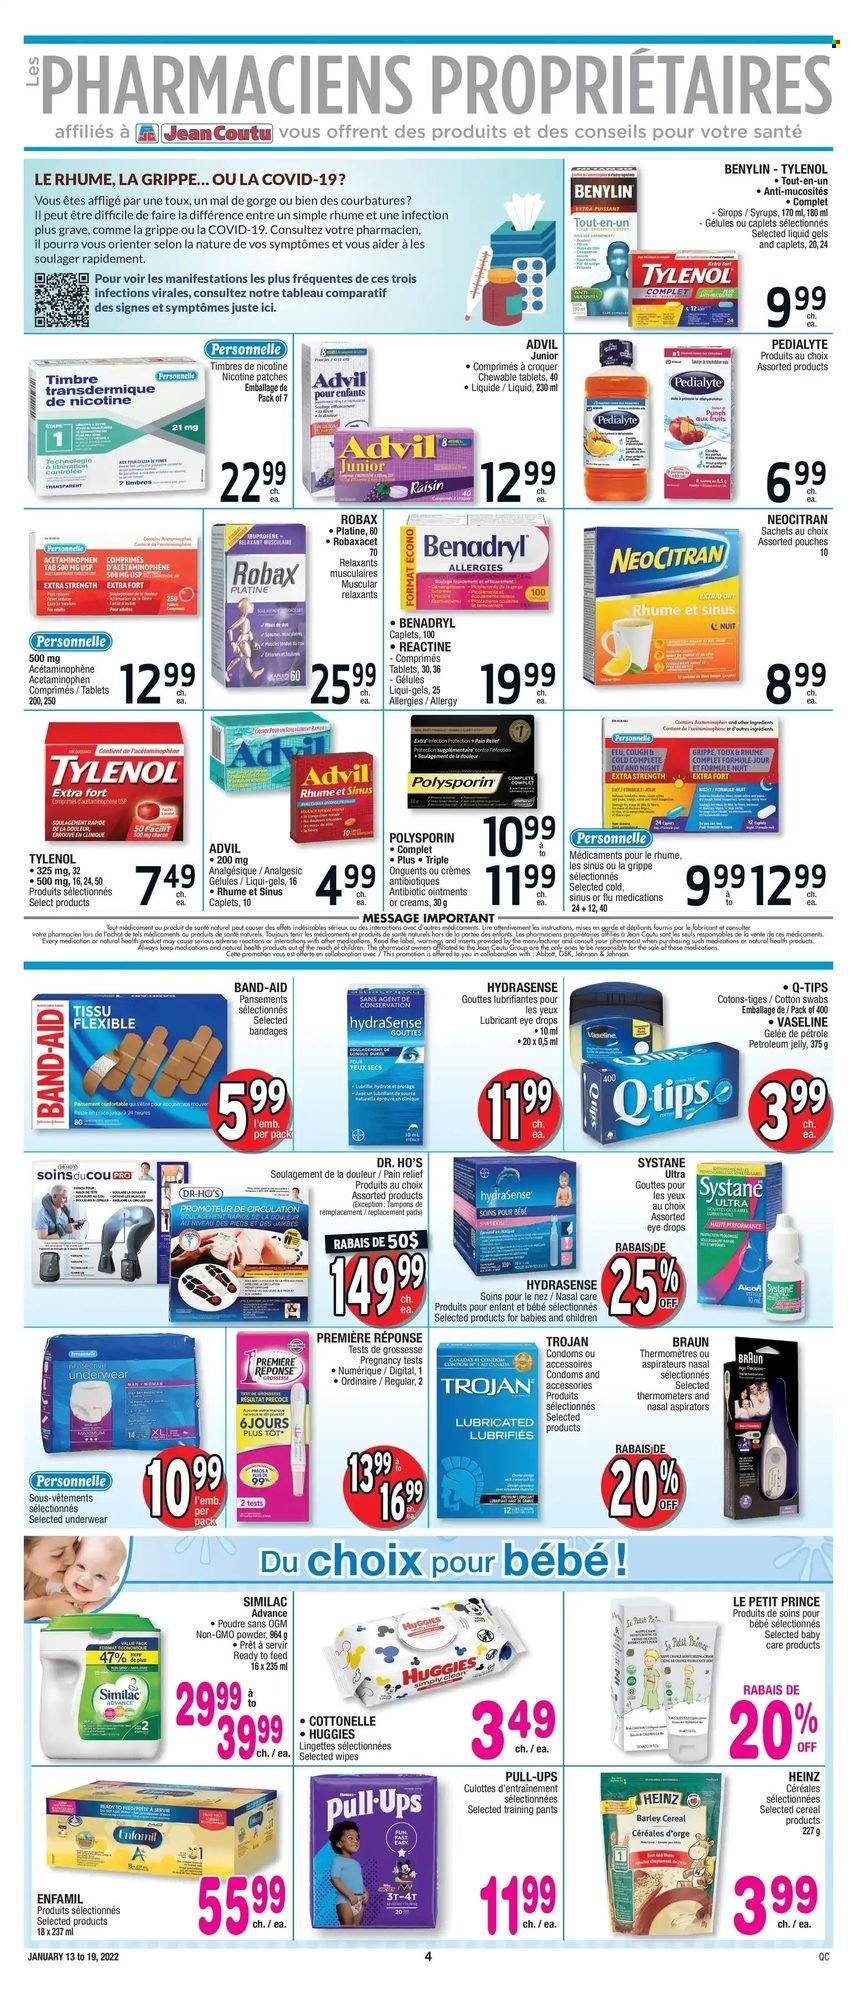 thumbnail - Jean Coutu Flyer - January 13, 2022 - January 19, 2022 - Sales products - cereals, wipes, pants, baby pants, petroleum jelly, Cottonelle, Vaseline, tampons, lubricant, pain relief, Tylenol, eye drops, Advil Rapid, Benylin, Heinz, band-aid, Braun, Systane, Huggies. Page 2.